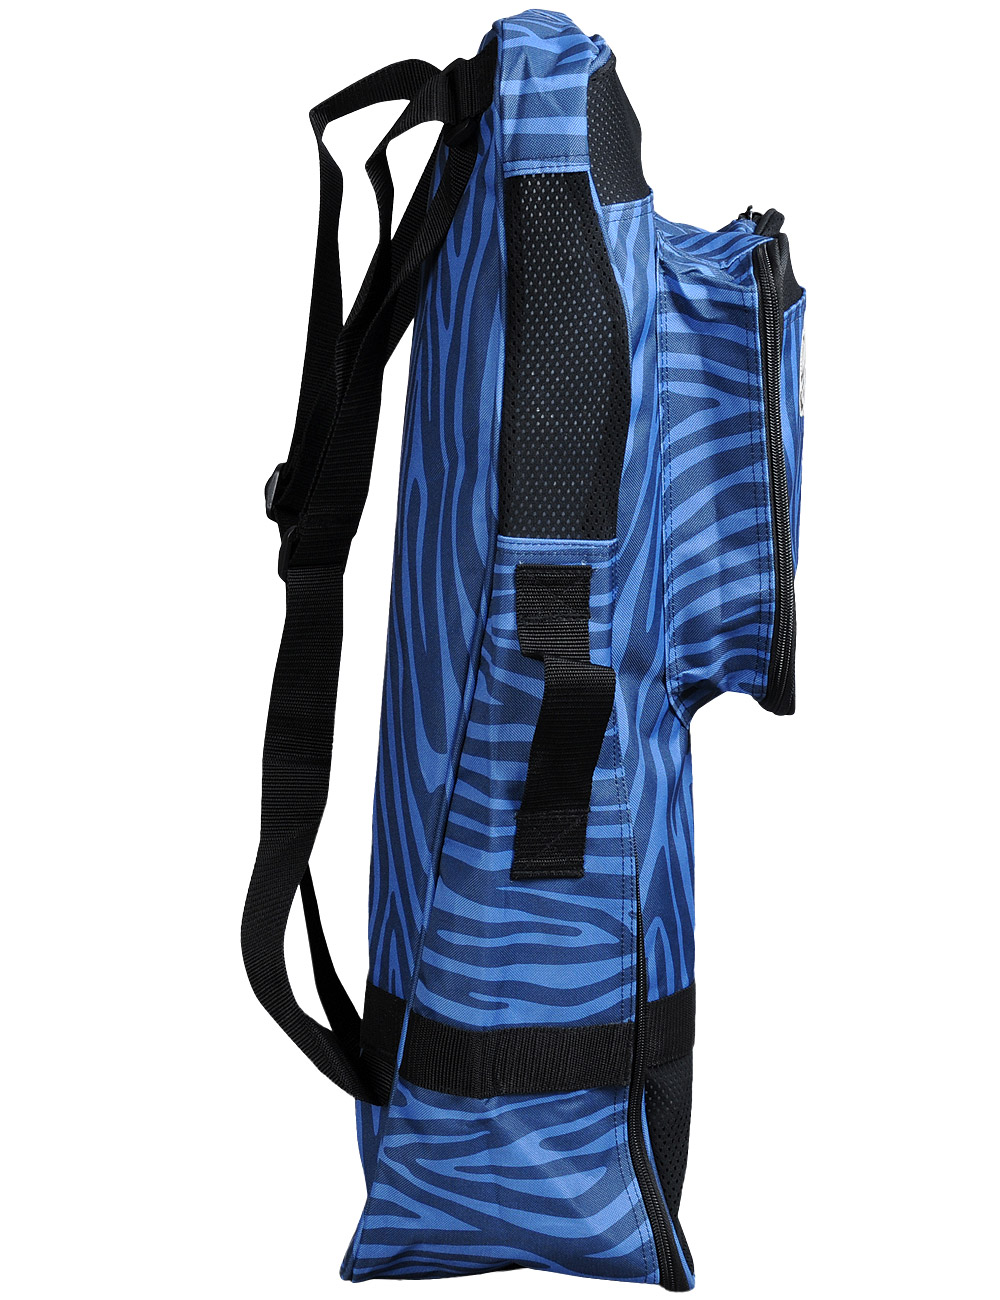 ABC snorkelling bag for equipment